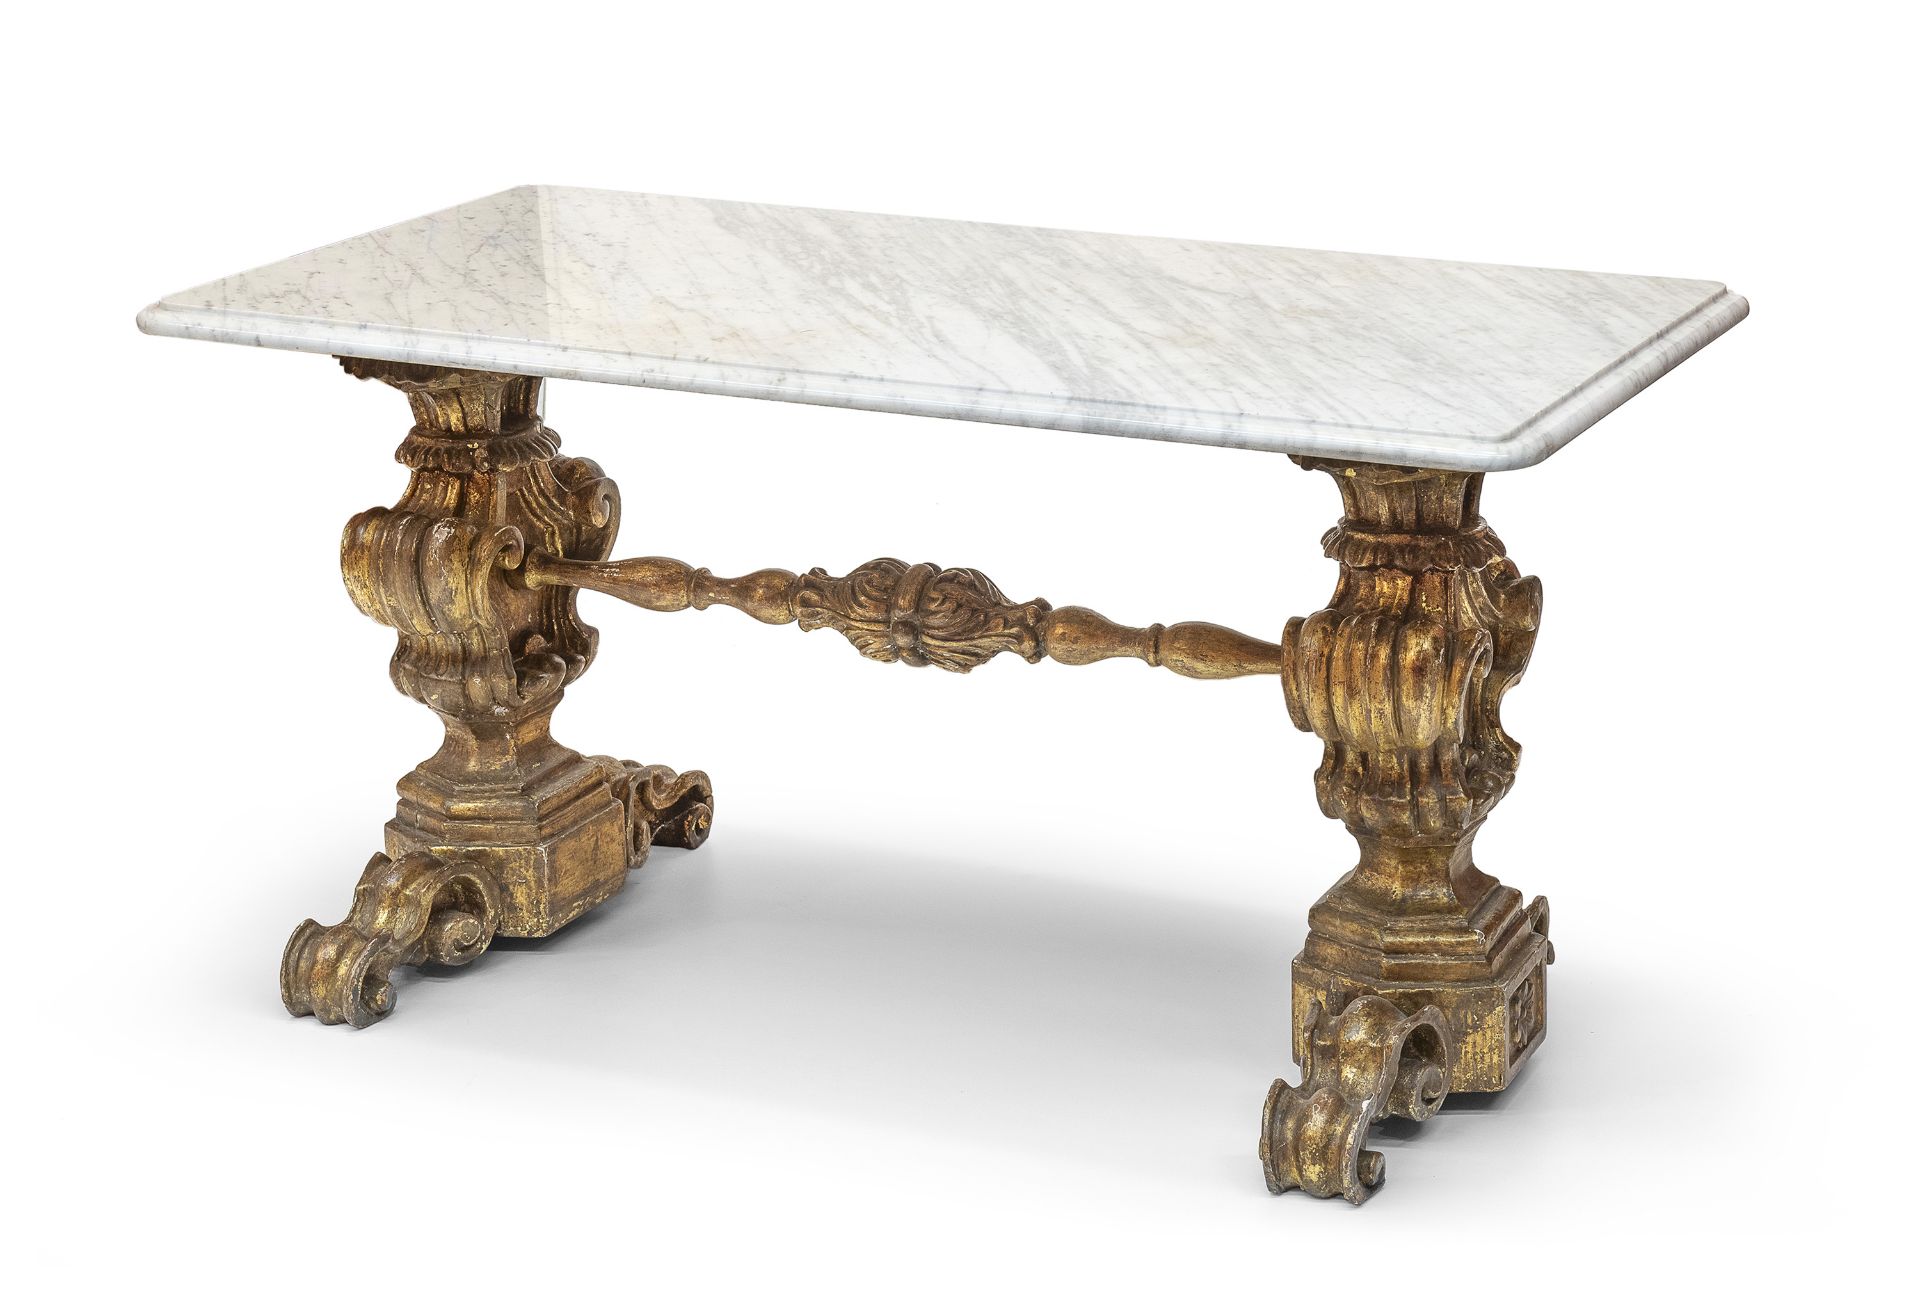 COFFEE TABLE ANTIQUE ELEMENTS